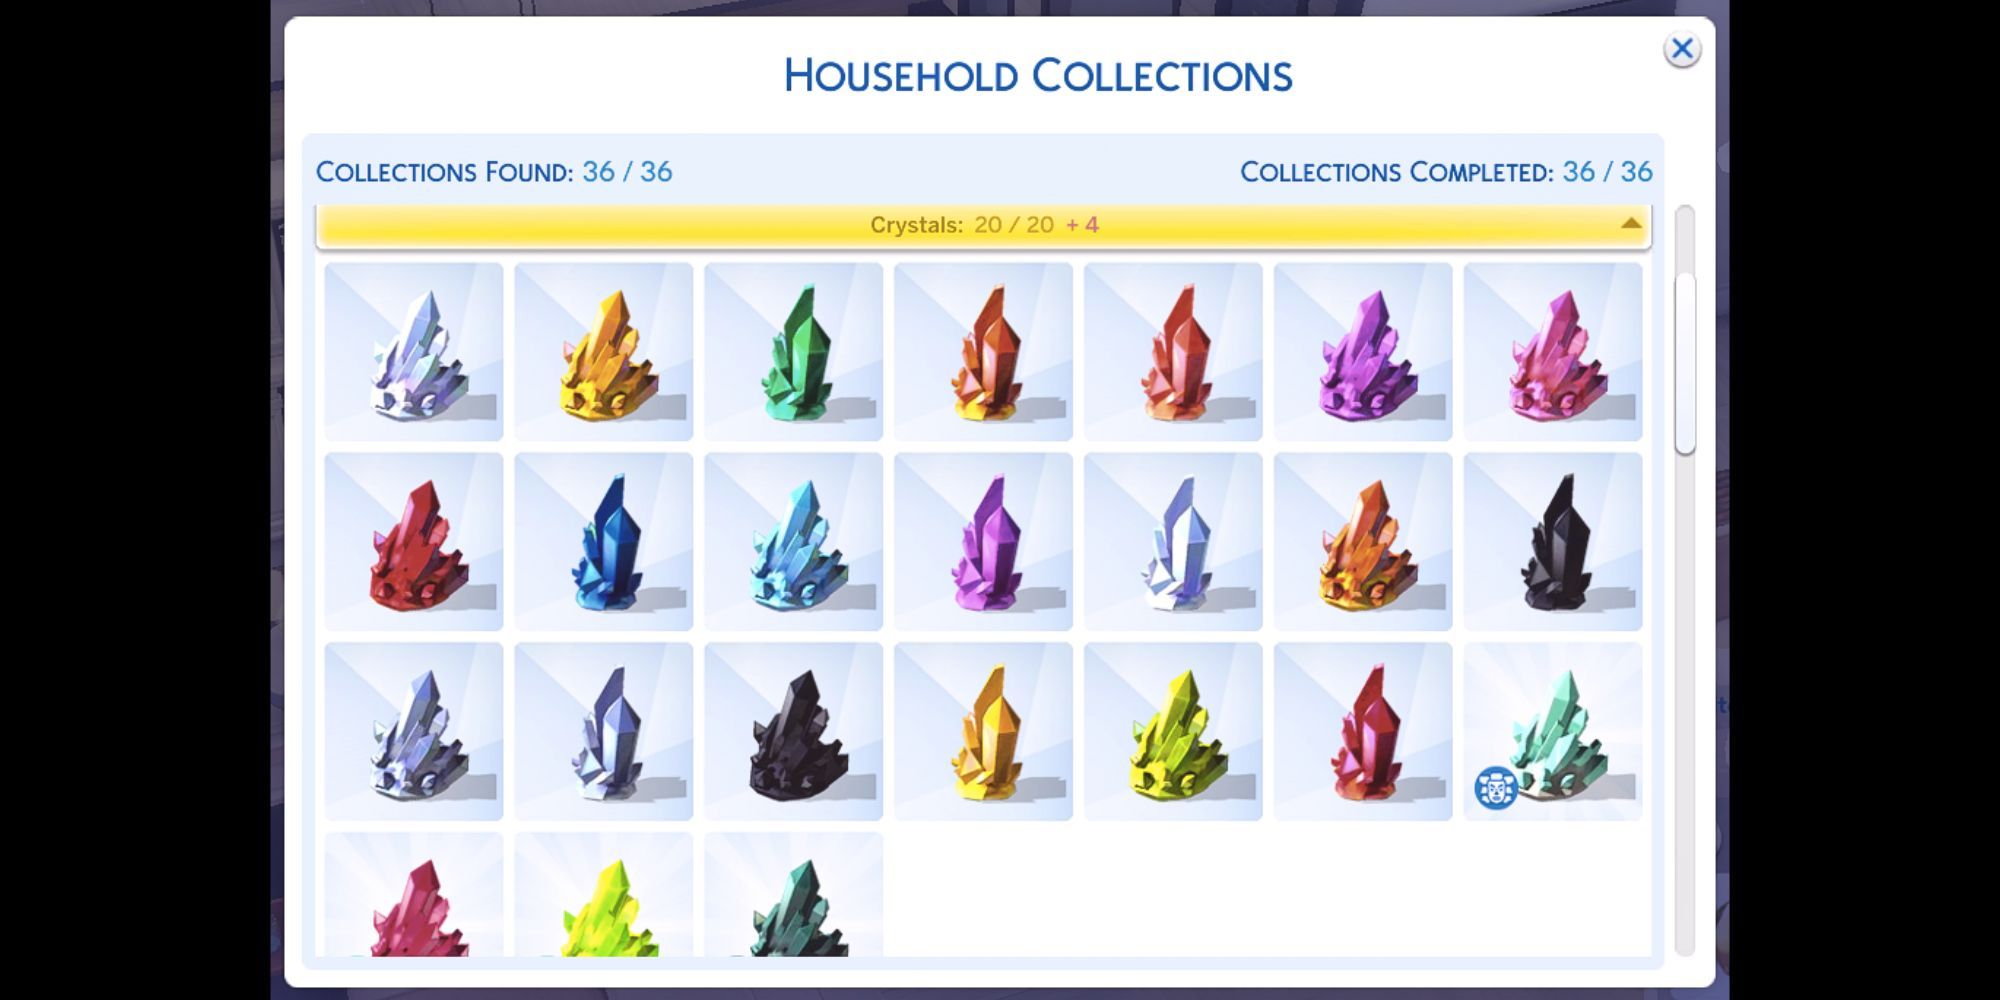 The Sims 4 Crystals Collection